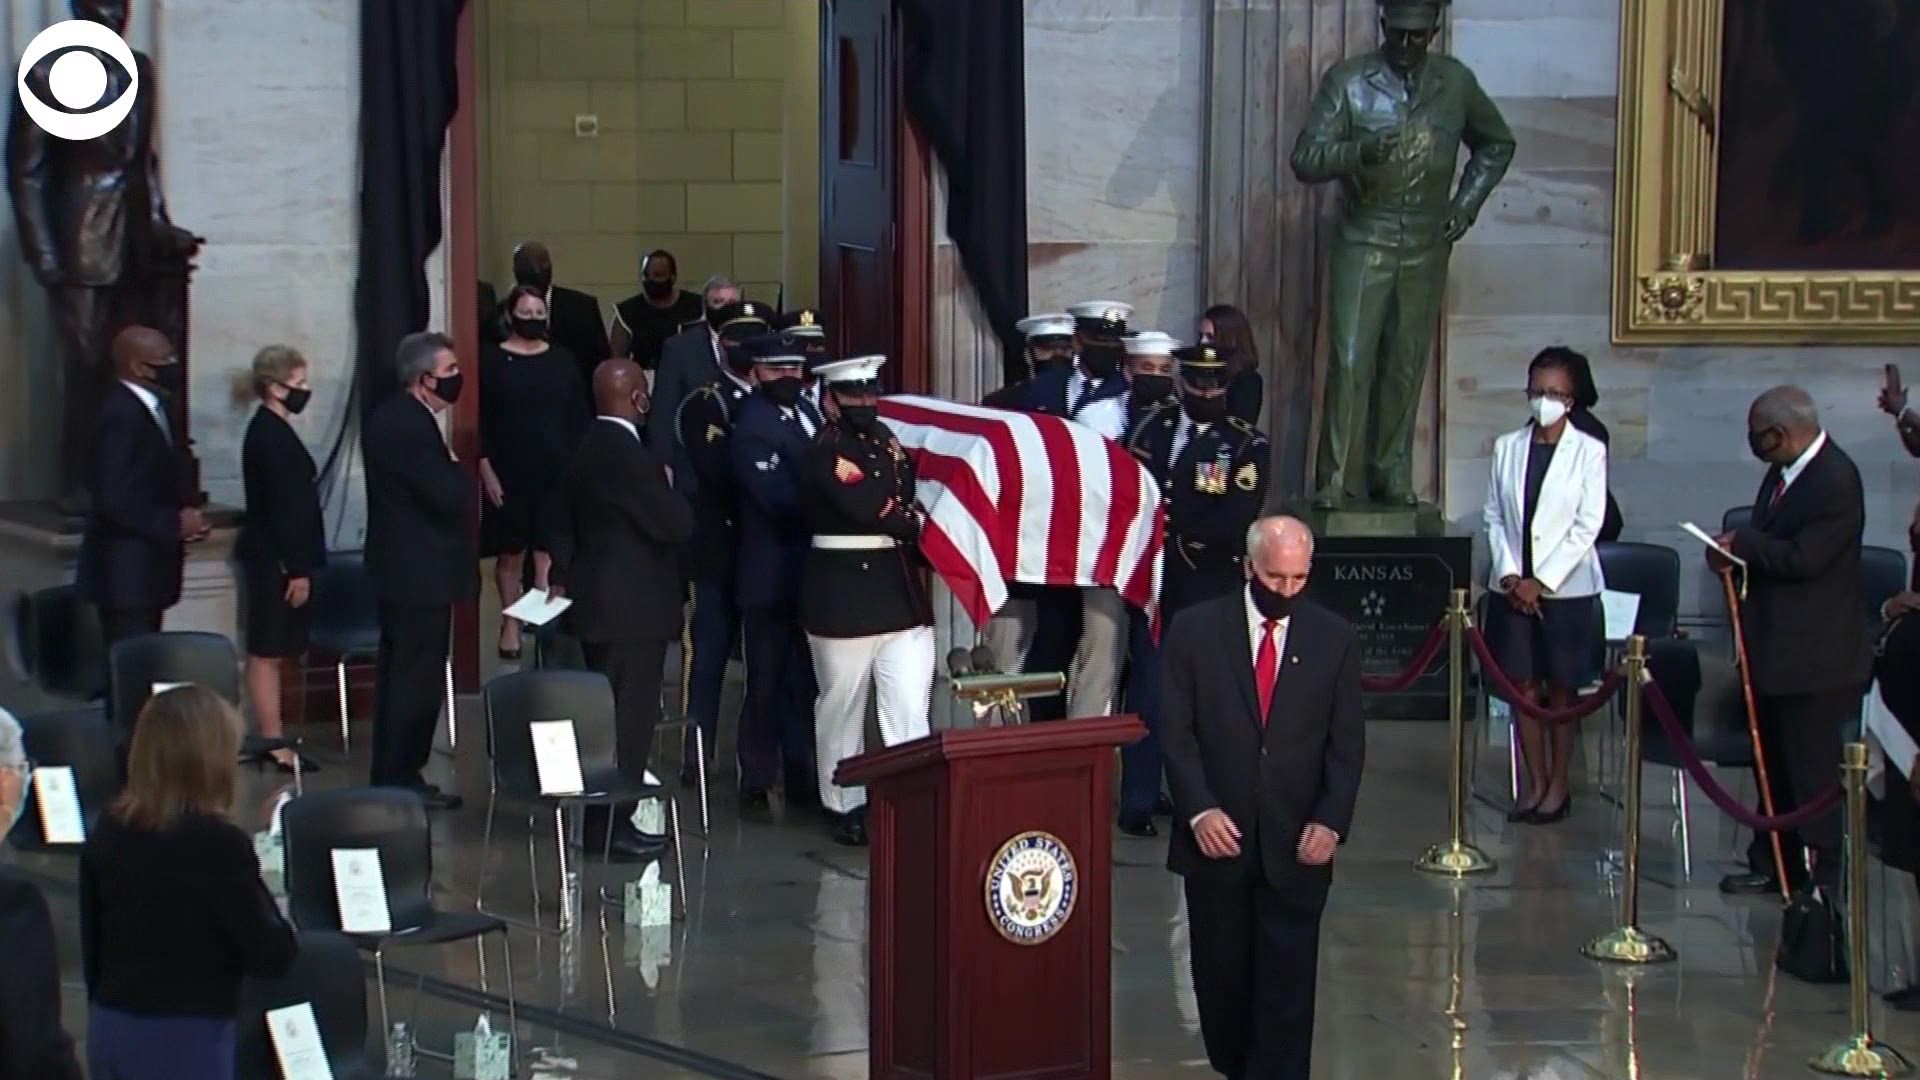 Congressman John Lewis was remembered as a “titan of the civil rights movement” and as a “peacemaker” during a memorial at the U.S. Capitol on Monday.